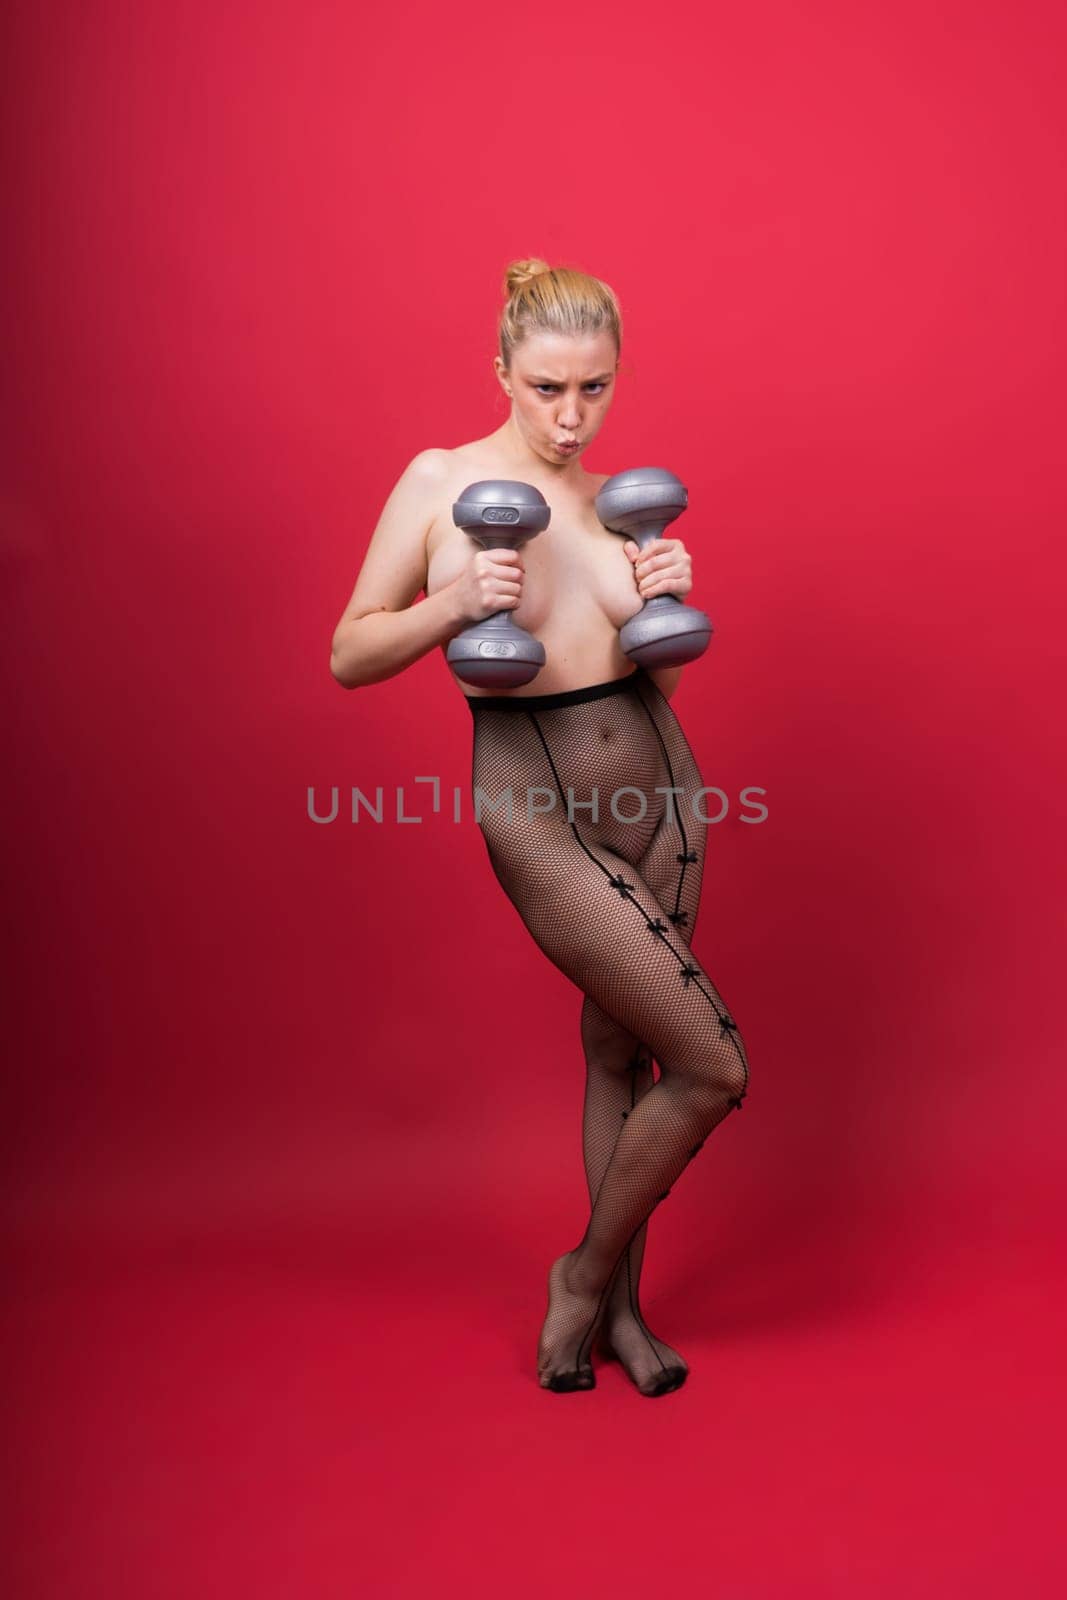 Smiling young plump fitness sporty seductive woman working out doing exercise with a dumbbells